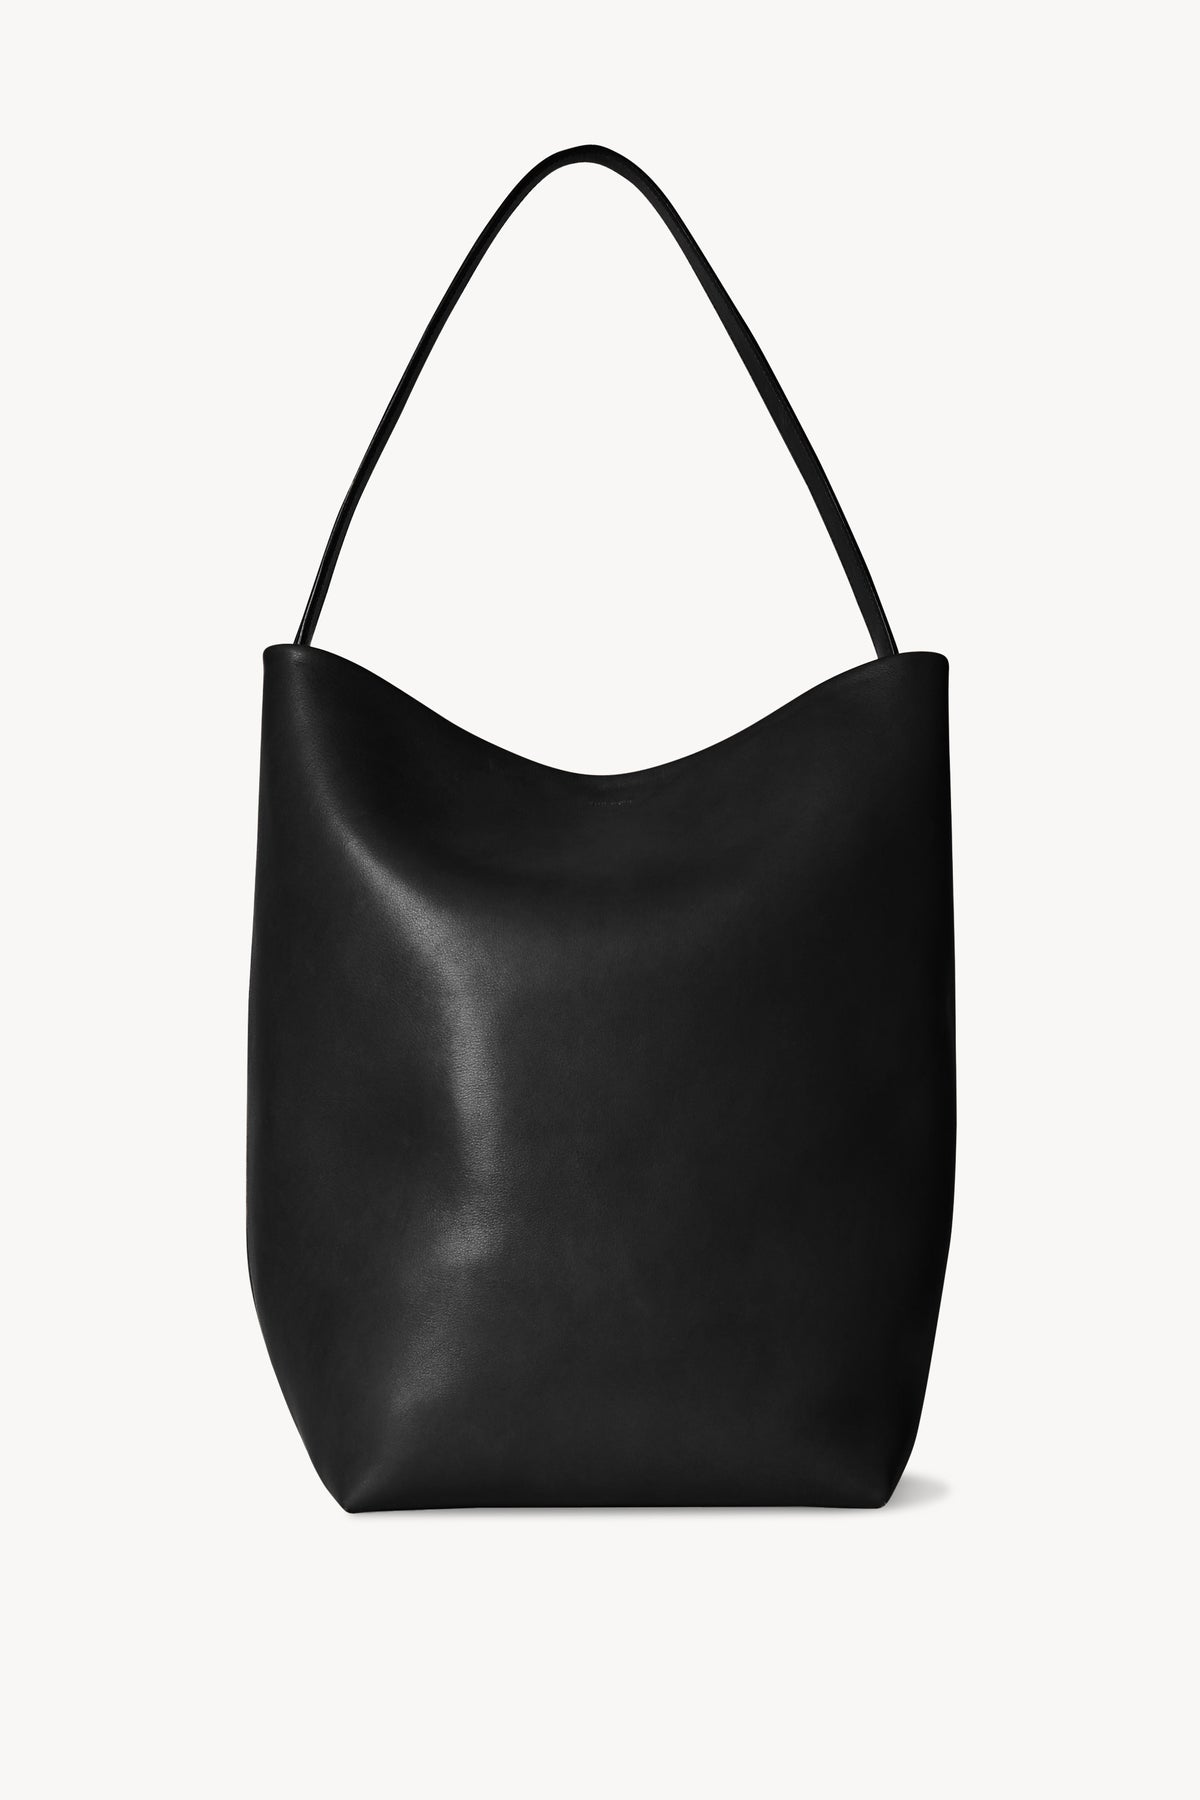 Park Small Leather Tote Bag in Black - The Row